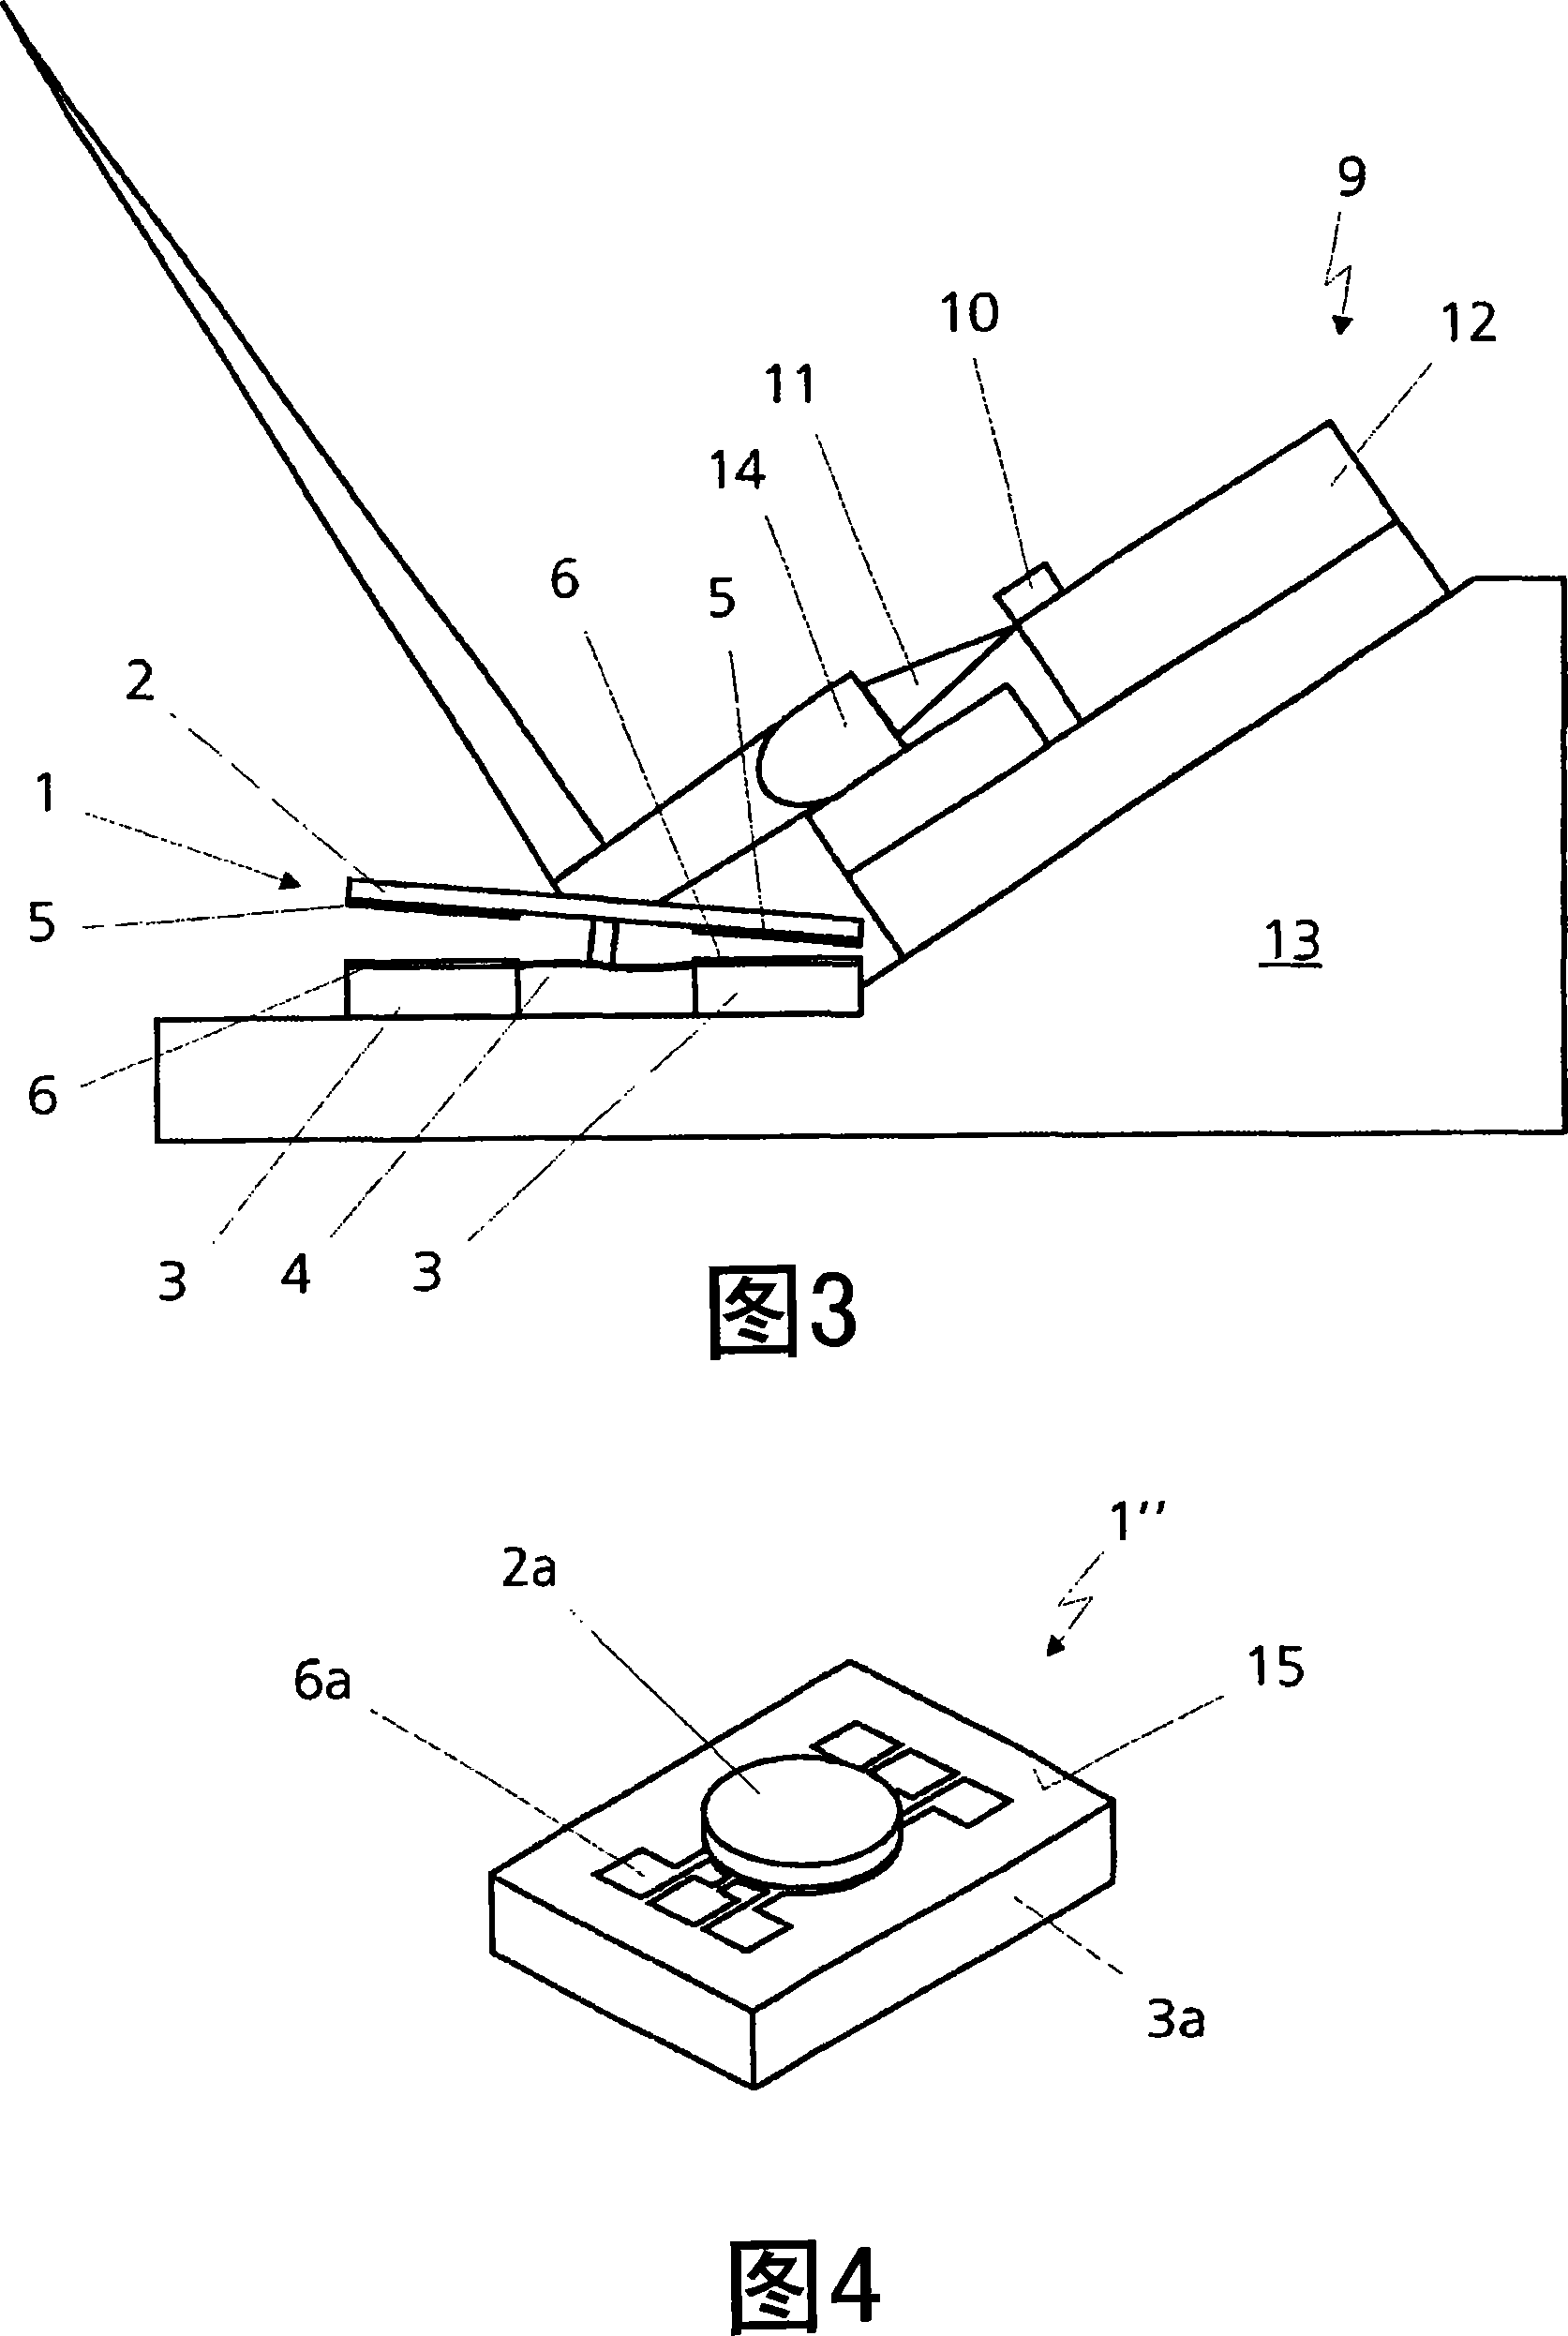 Micro electromechanical device for tilting a body in two degrees of freedom